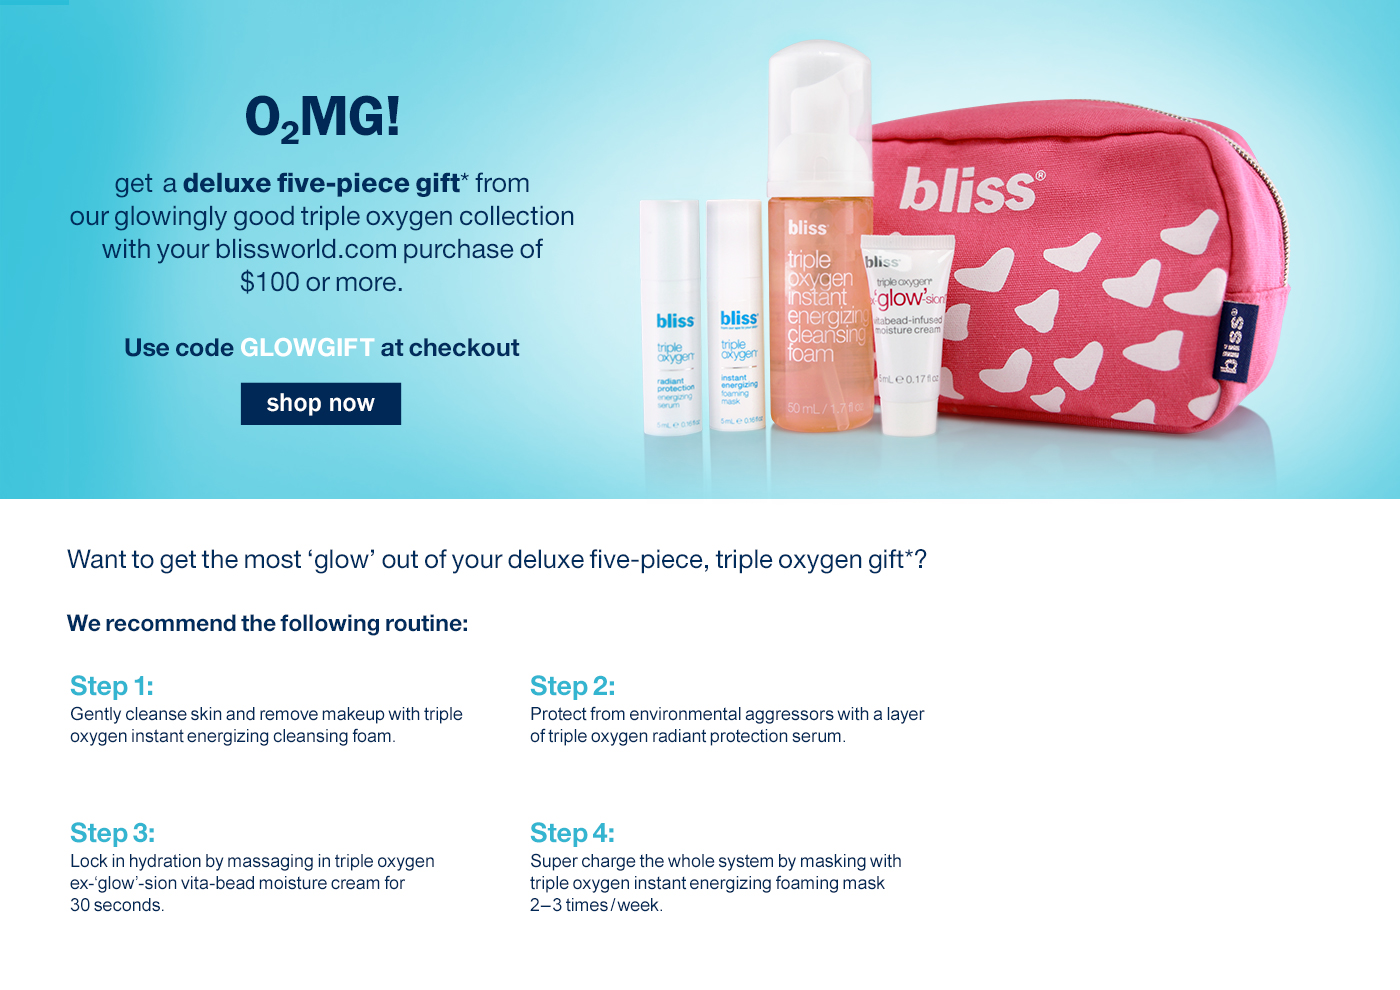 Receive a free 5-piece bonus gift with your $100 Bliss purchase